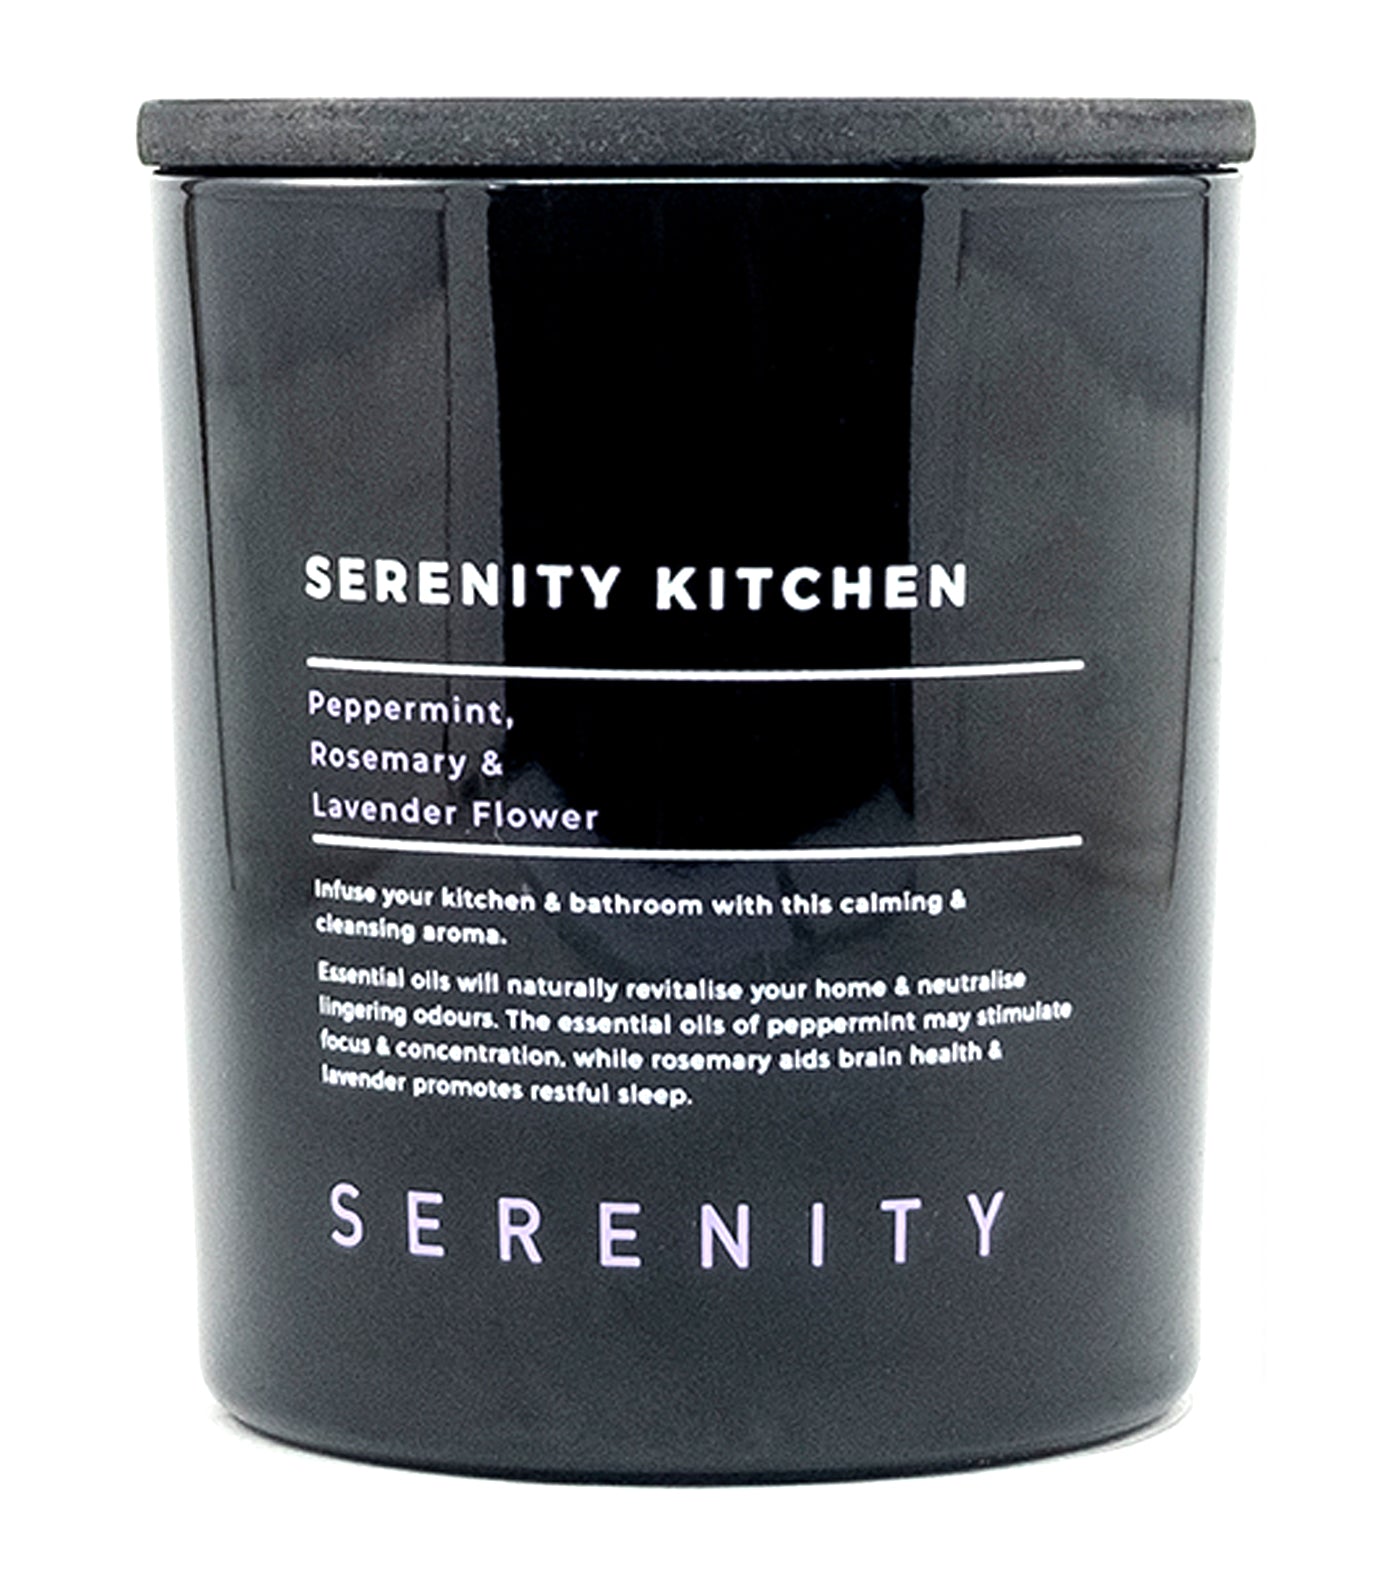 Nordic Serenity™ Scented Candle made with Essential Oils/ Sustainable  Natural Vegetable & Bees Wax/ CRANBOURN® Blue Glass/ Handmade in the UK